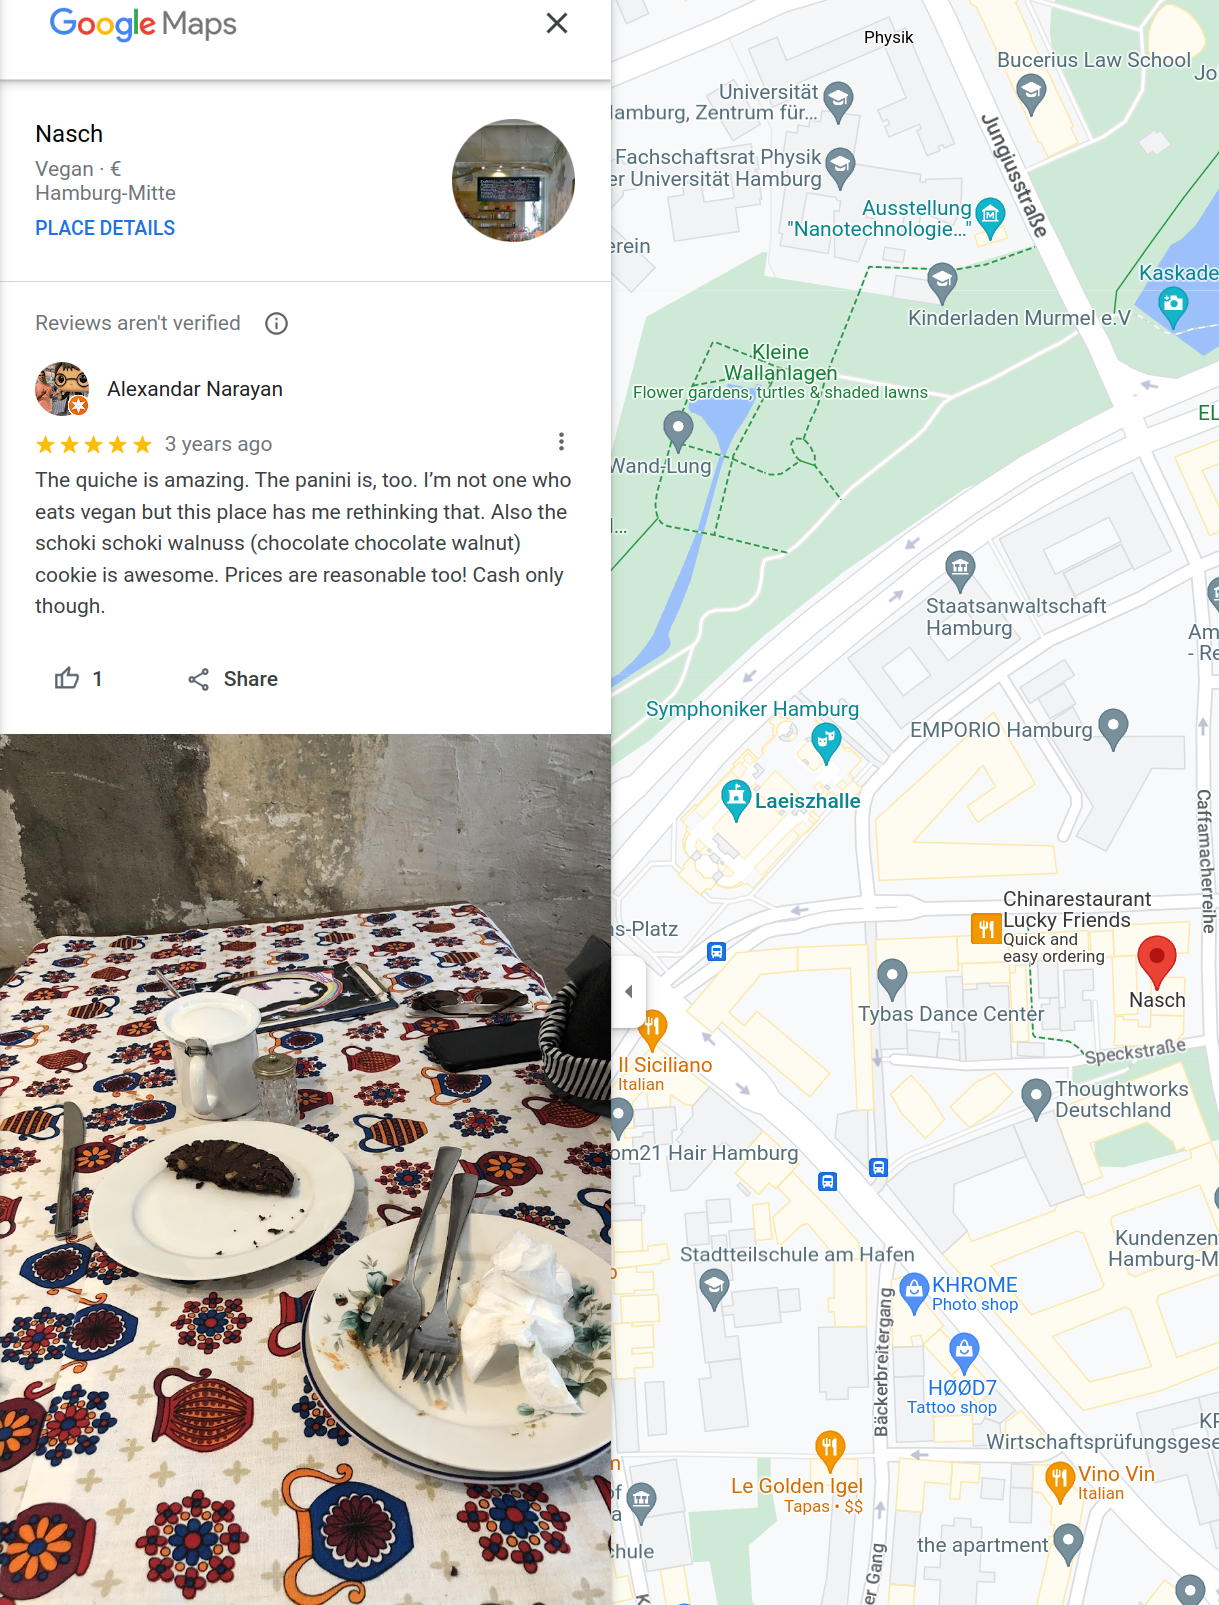 The First Google Maps Review Of Nasch We Made